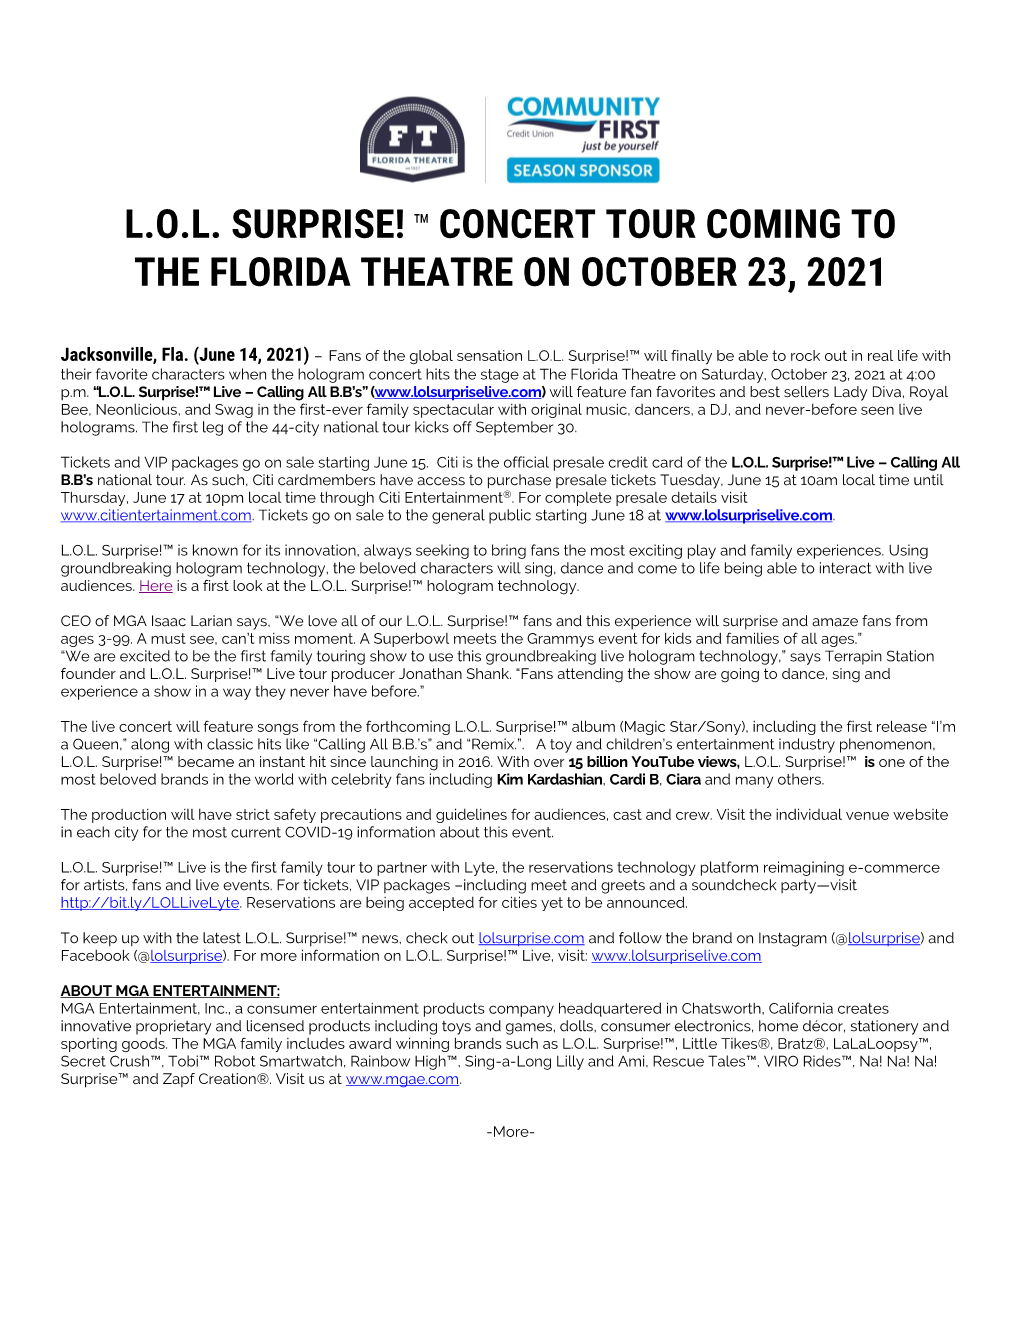 Lol Surprise! ™ Concert Tour Coming to the Florida Theatre on October 23, 2021